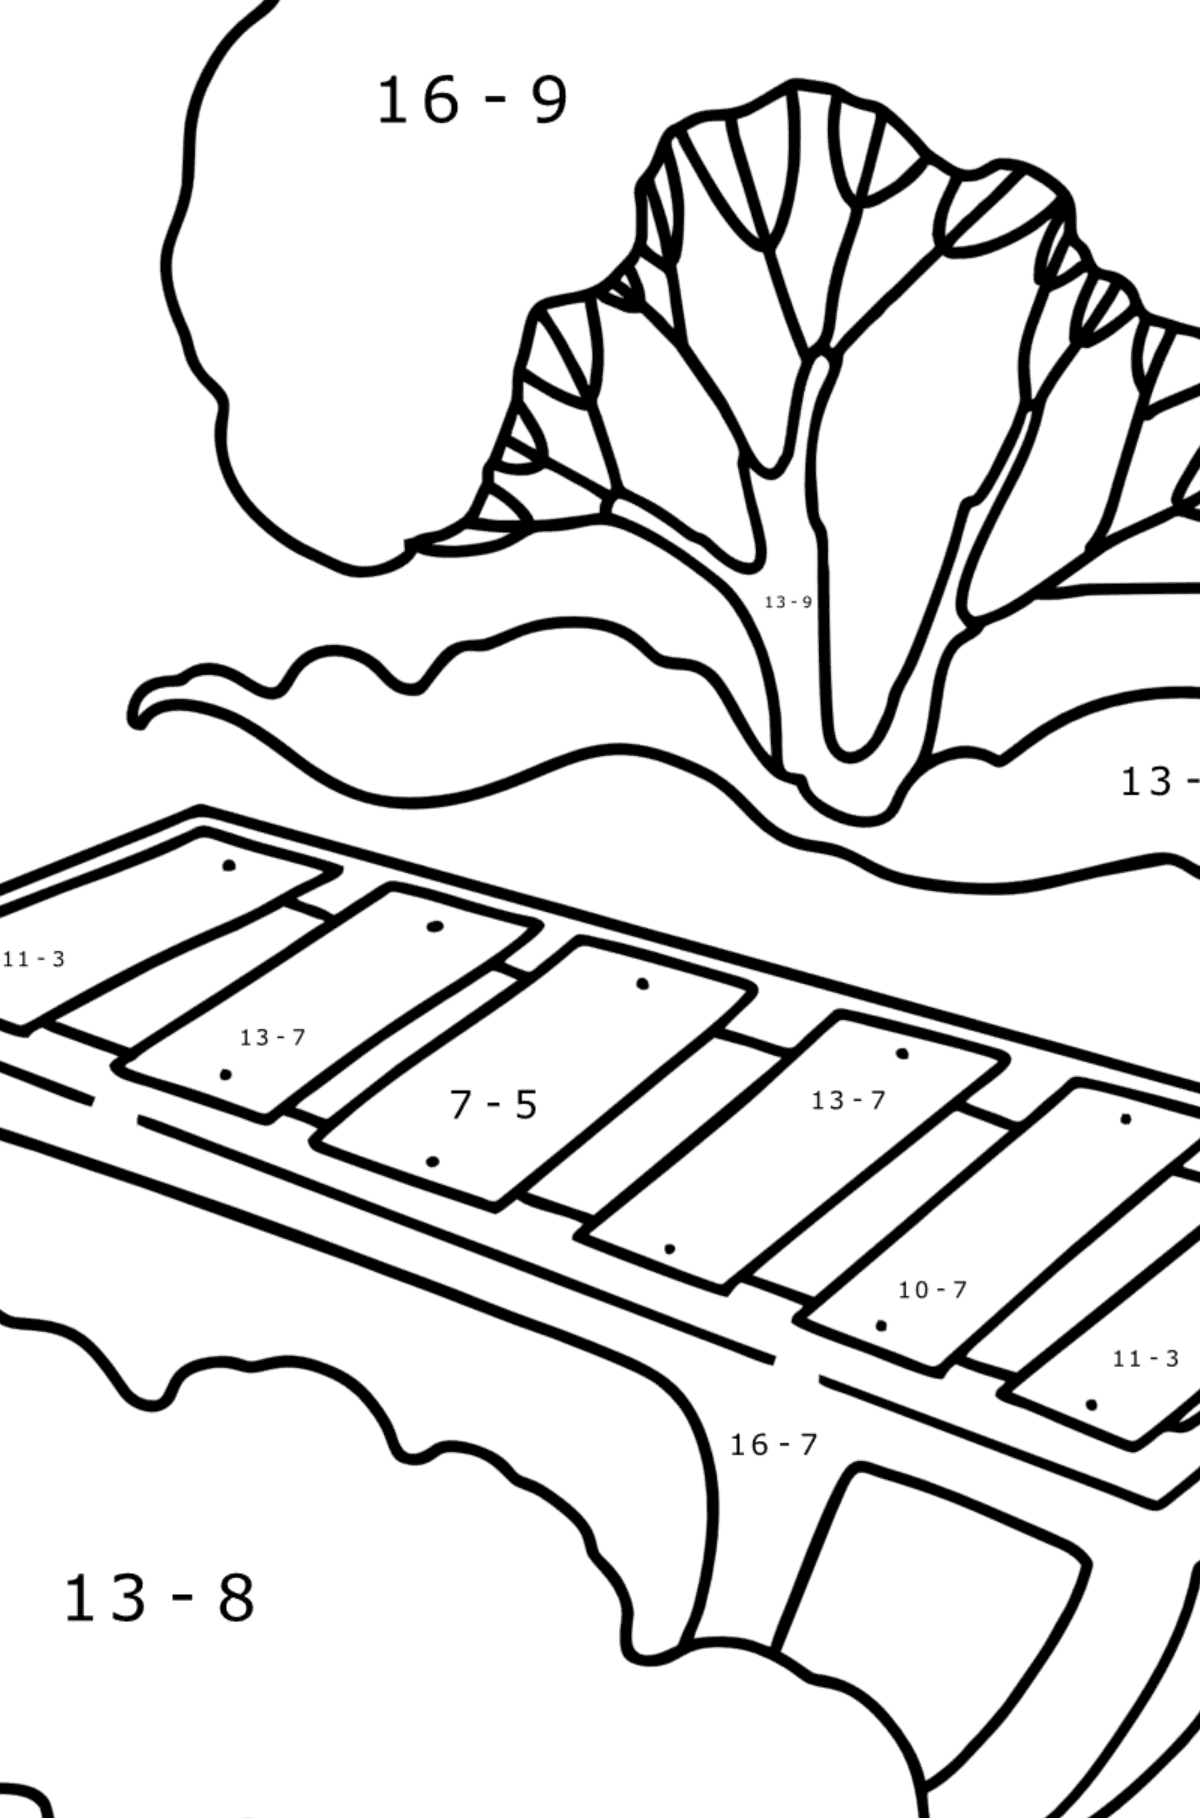 Coloring page - Sled for Kids - Math Coloring - Subtraction for Kids